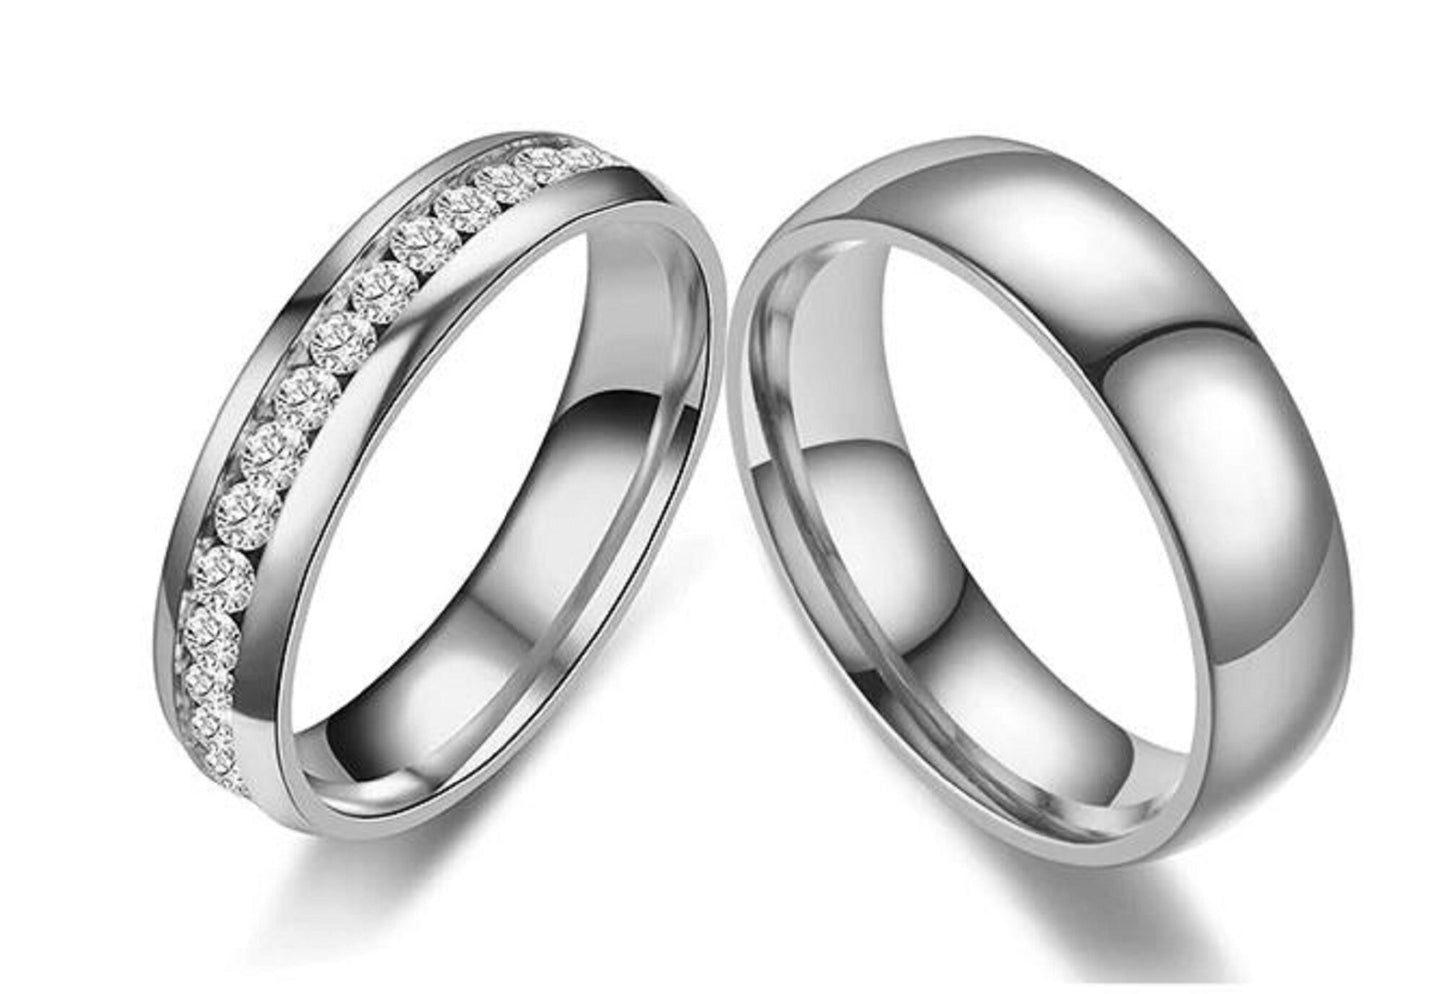 Couples Eternity Wedding Ring Set Titanium Steel and Crystal for Him & Her - Friendship, Promise, Engagement, Anniversary, Just Because